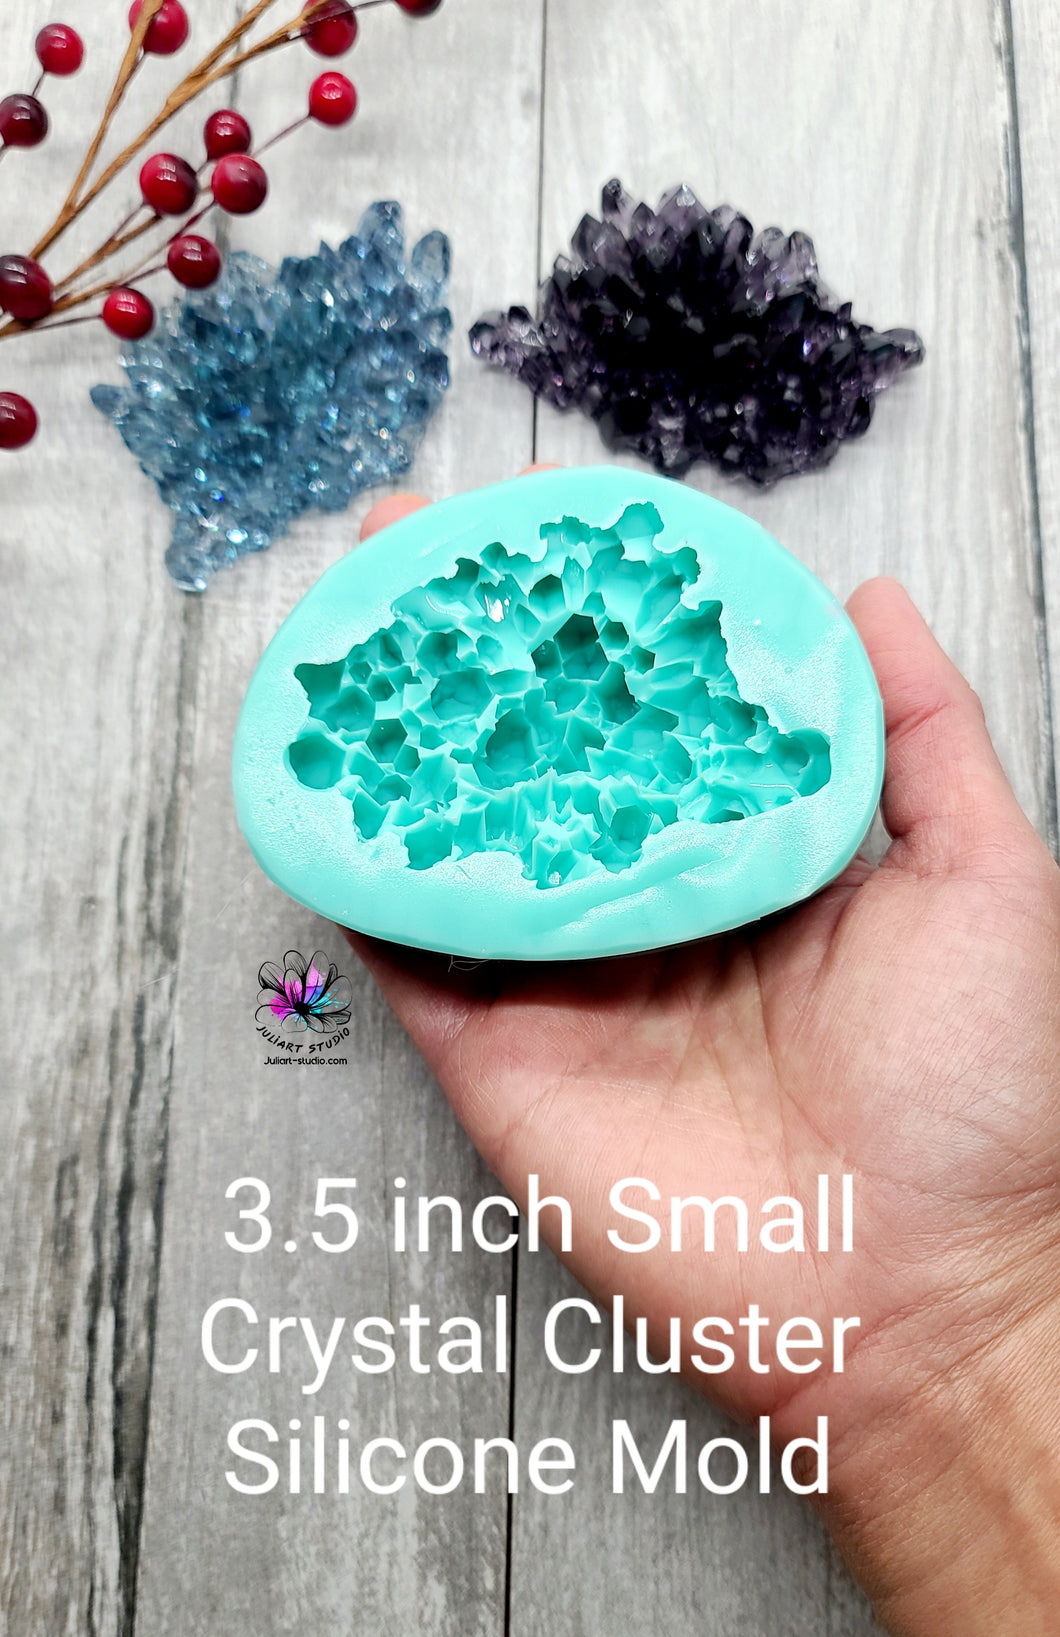 3.5 inch SMALL Crystal Cluster Silicone Mold for Resin